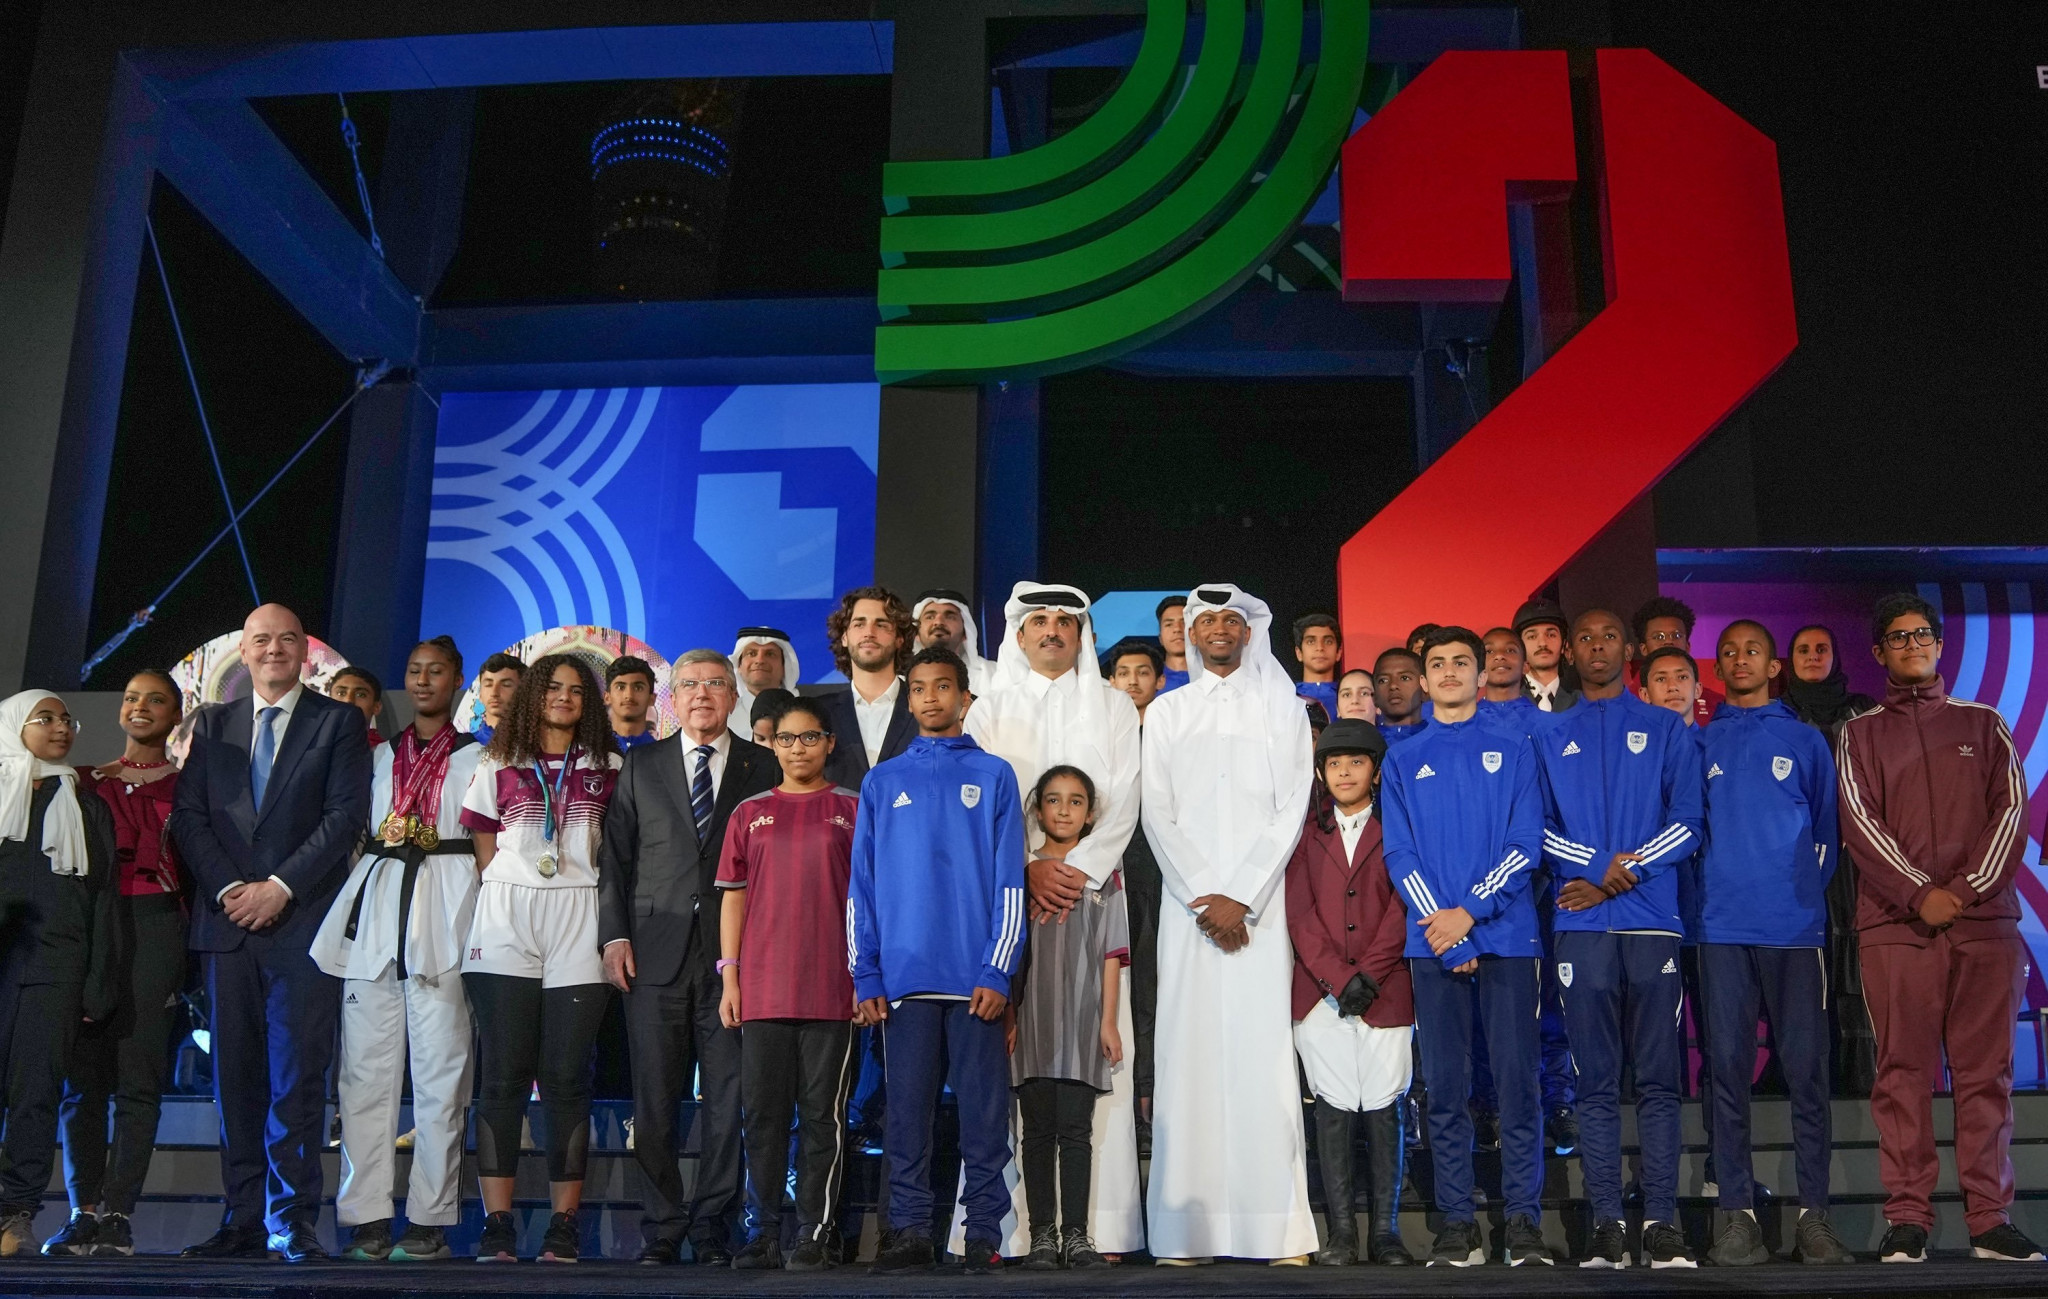 IOC President Thomas Bach and his FIFA counterpart Gianni Infantino were among those present for the opening of the 3-2-1 Qatar Olympic and Sports Museum ©Qatar Olympic Committee